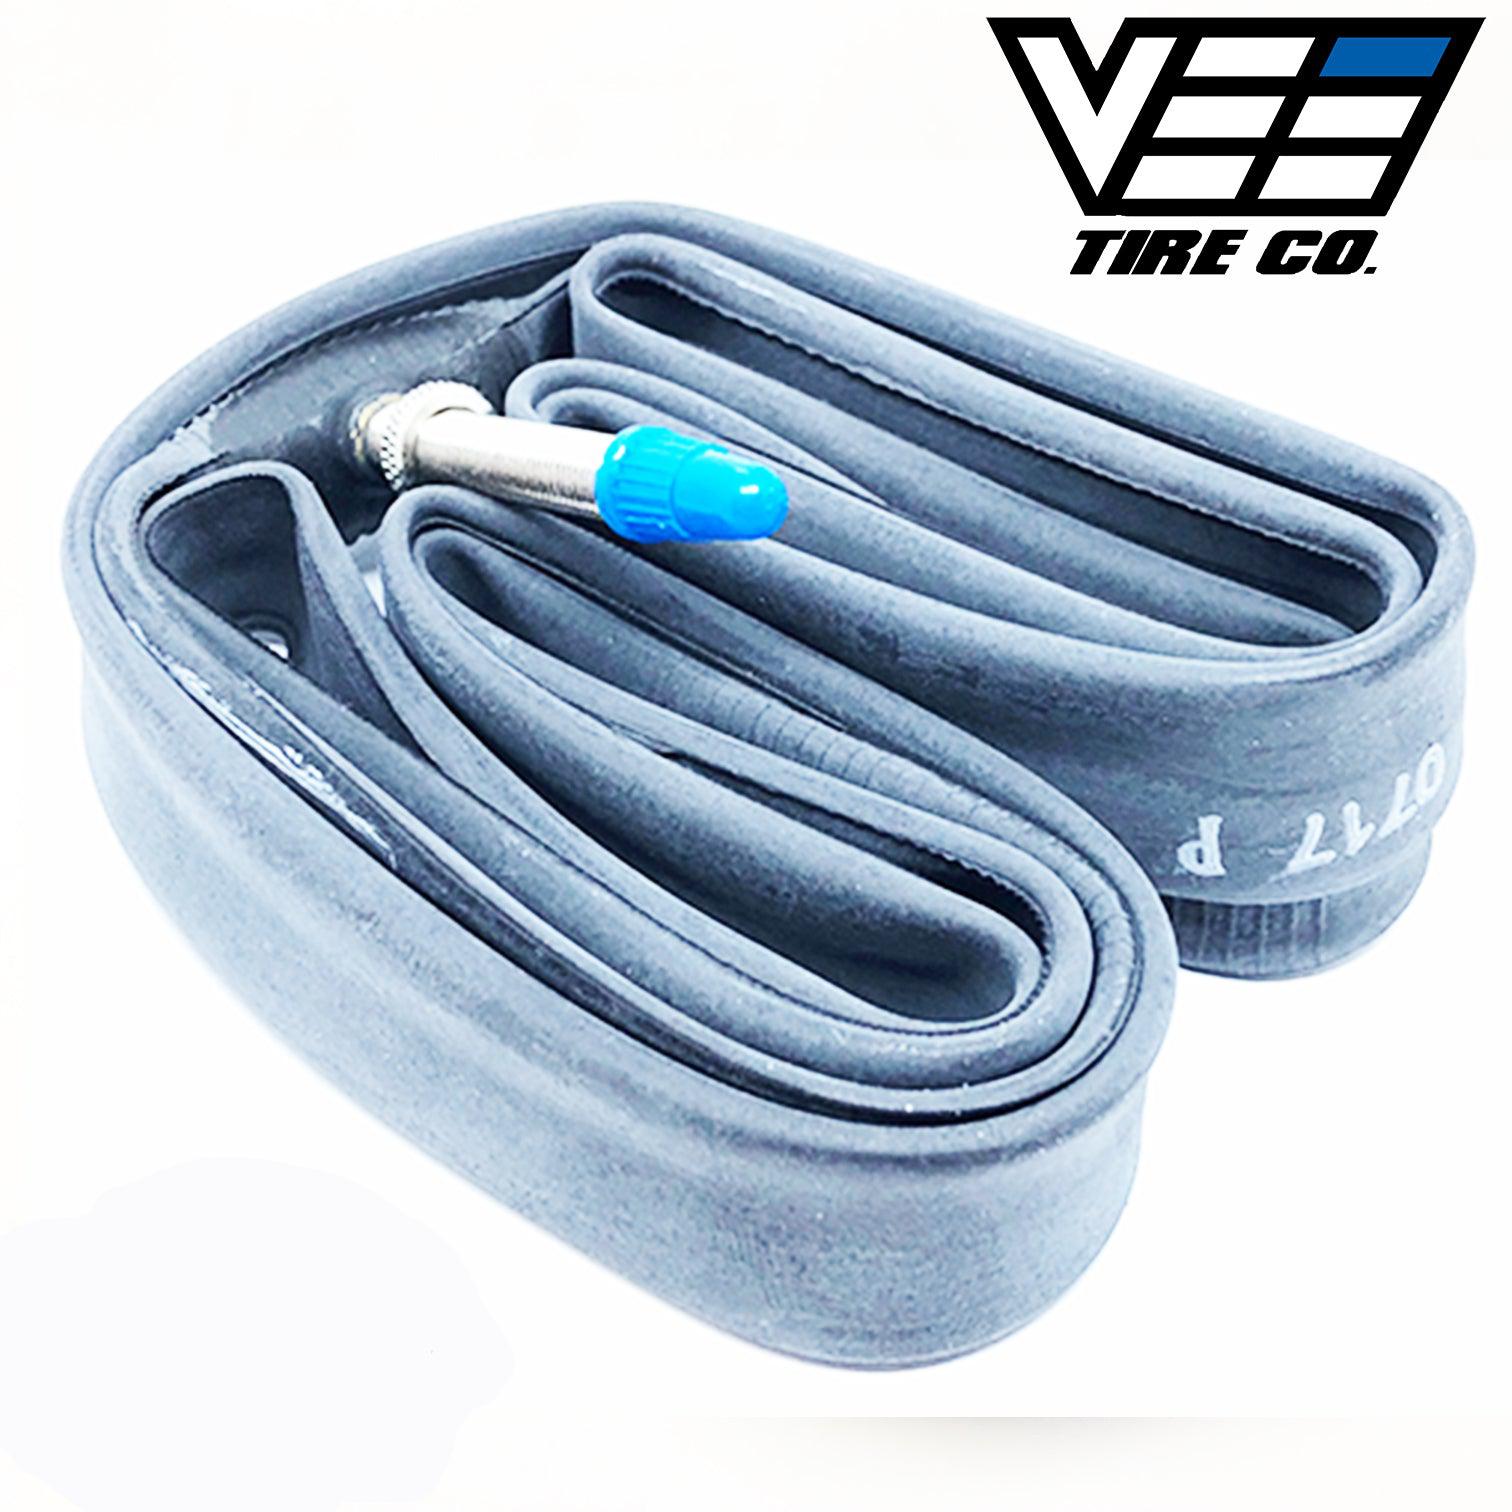 Vee tire co offers a wide range of products including alloy rims and Vee 20 X 1.3/8 Inch Tubes (FV 48mm). With a focus on quality and performance, Vee tire co consistently delivers innovative solutions for cyclists worldwide.